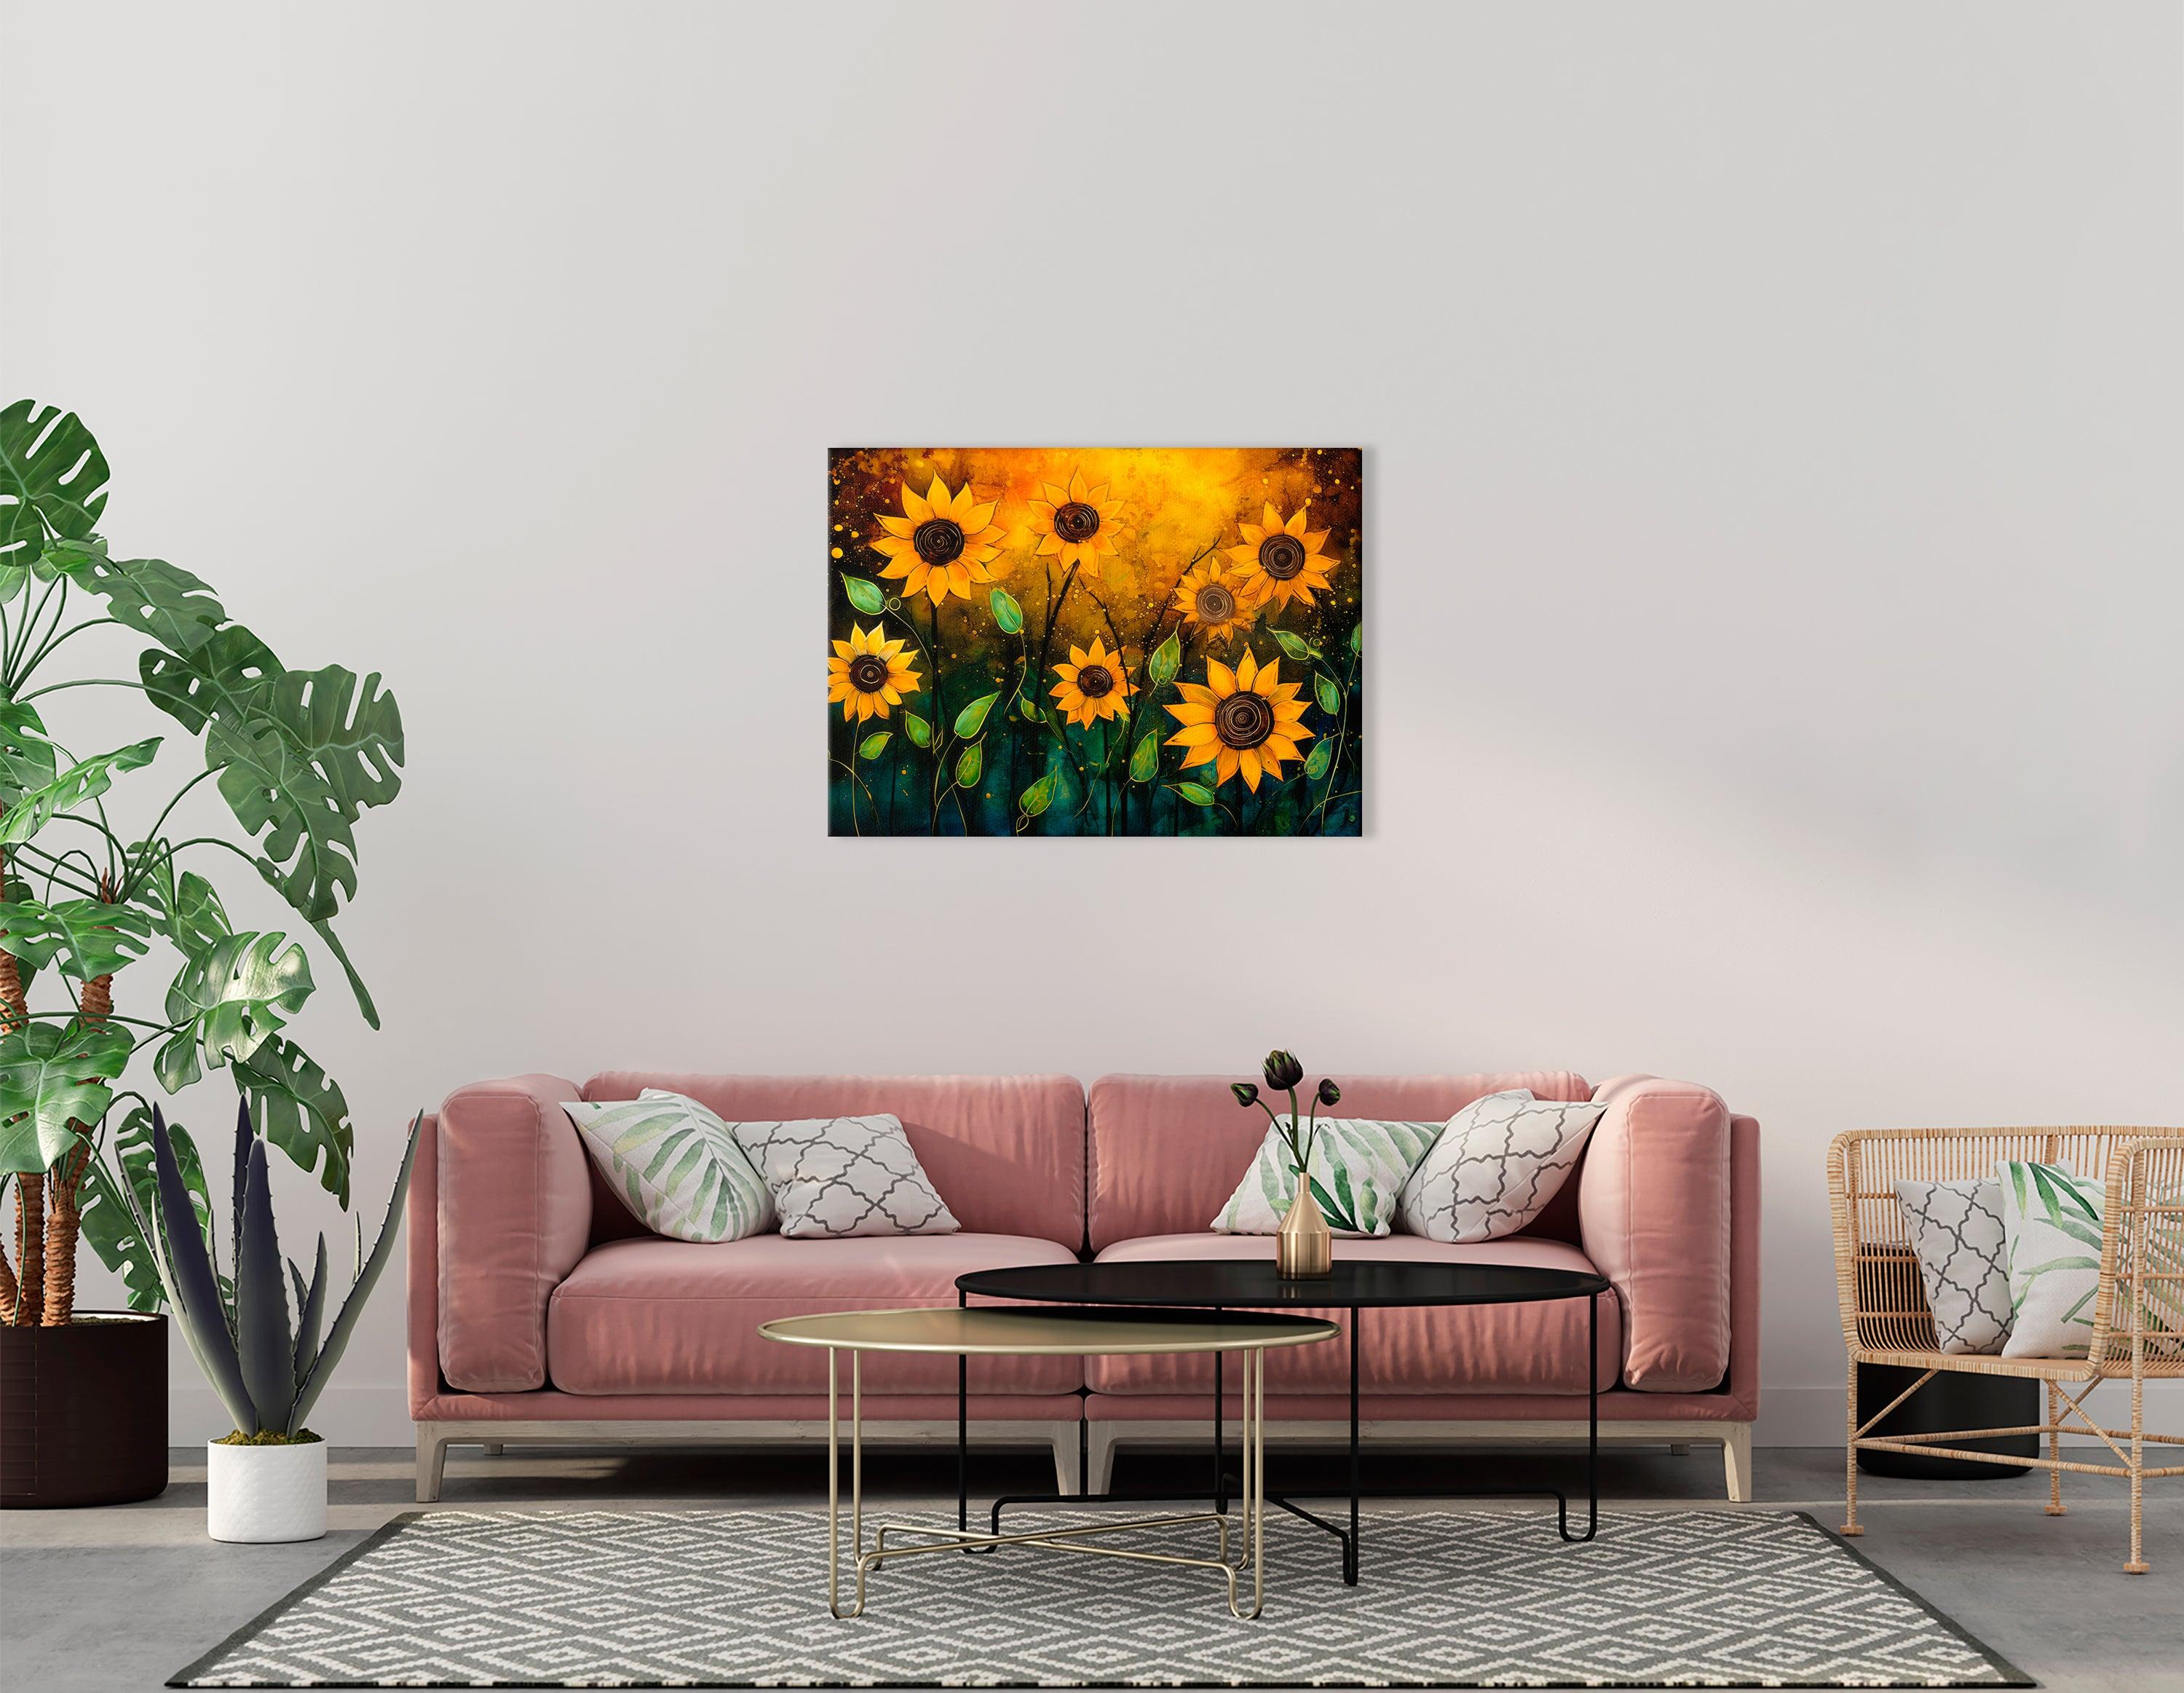 Glowing Sunflowers on Contrast Background - Canvas Print - Artoholica Ready to Hang Canvas Print